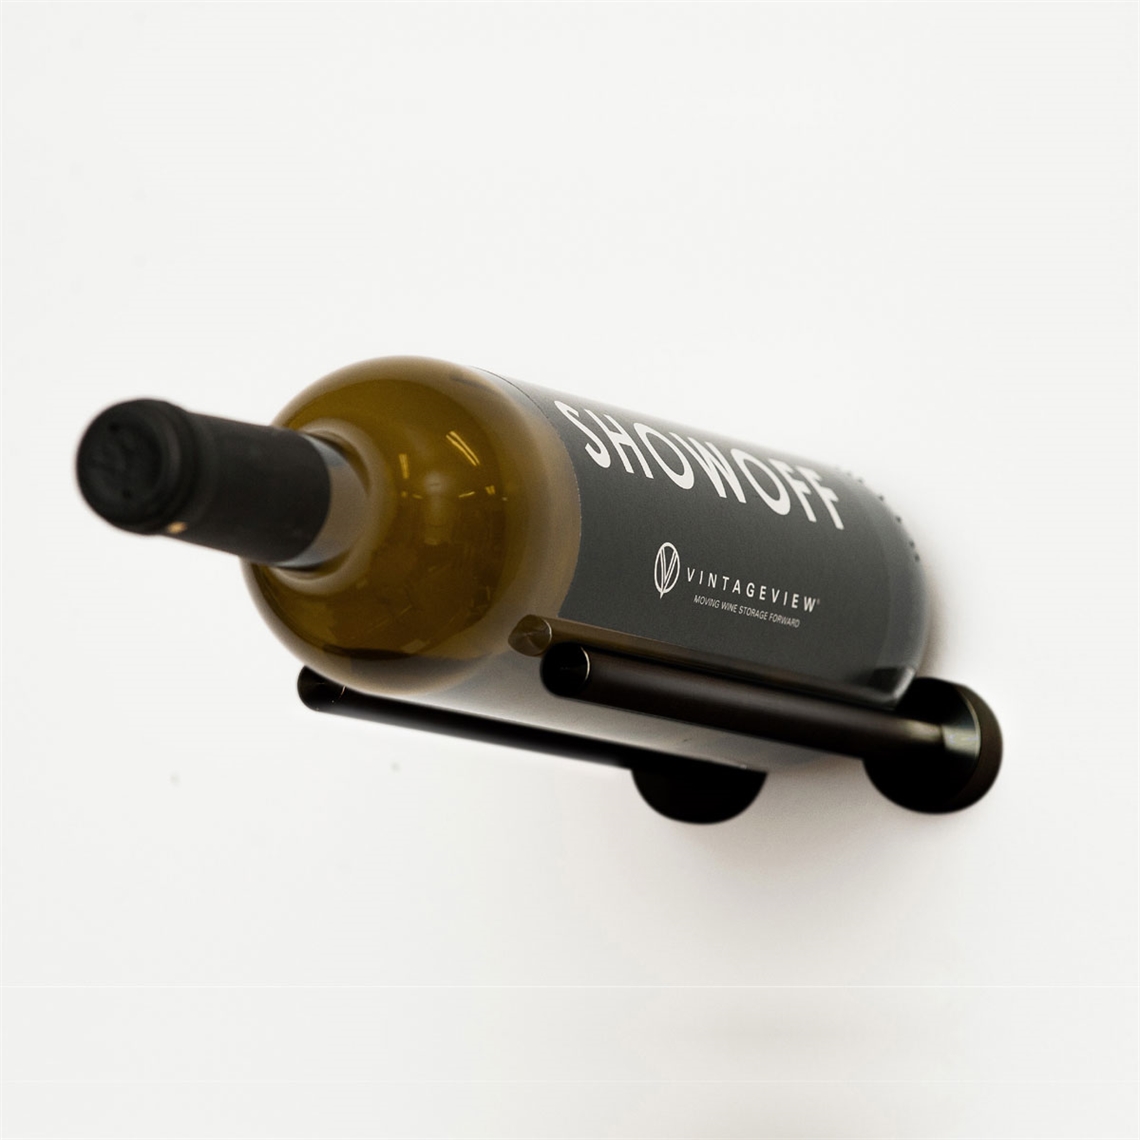 View more plastic wine racks from our Wall Mounted Wine Racks range